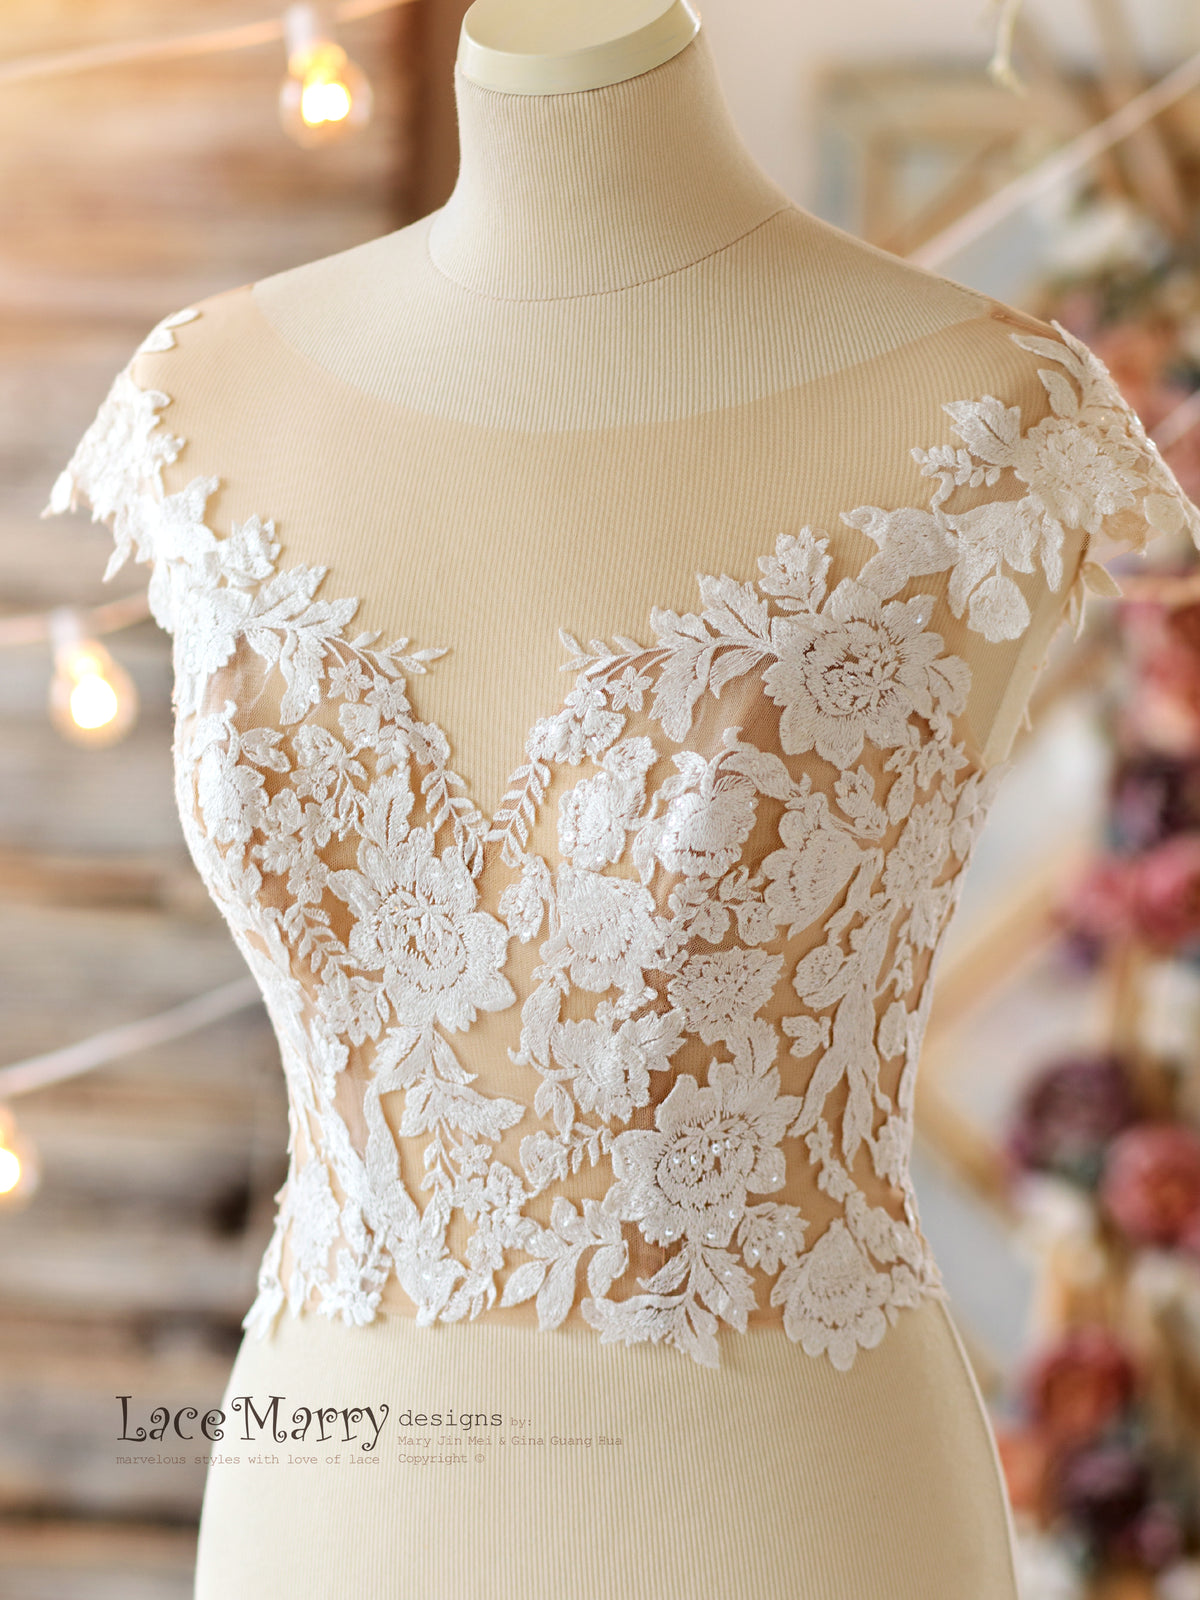 Amazing Floral Lace Top with Illusion Neckline